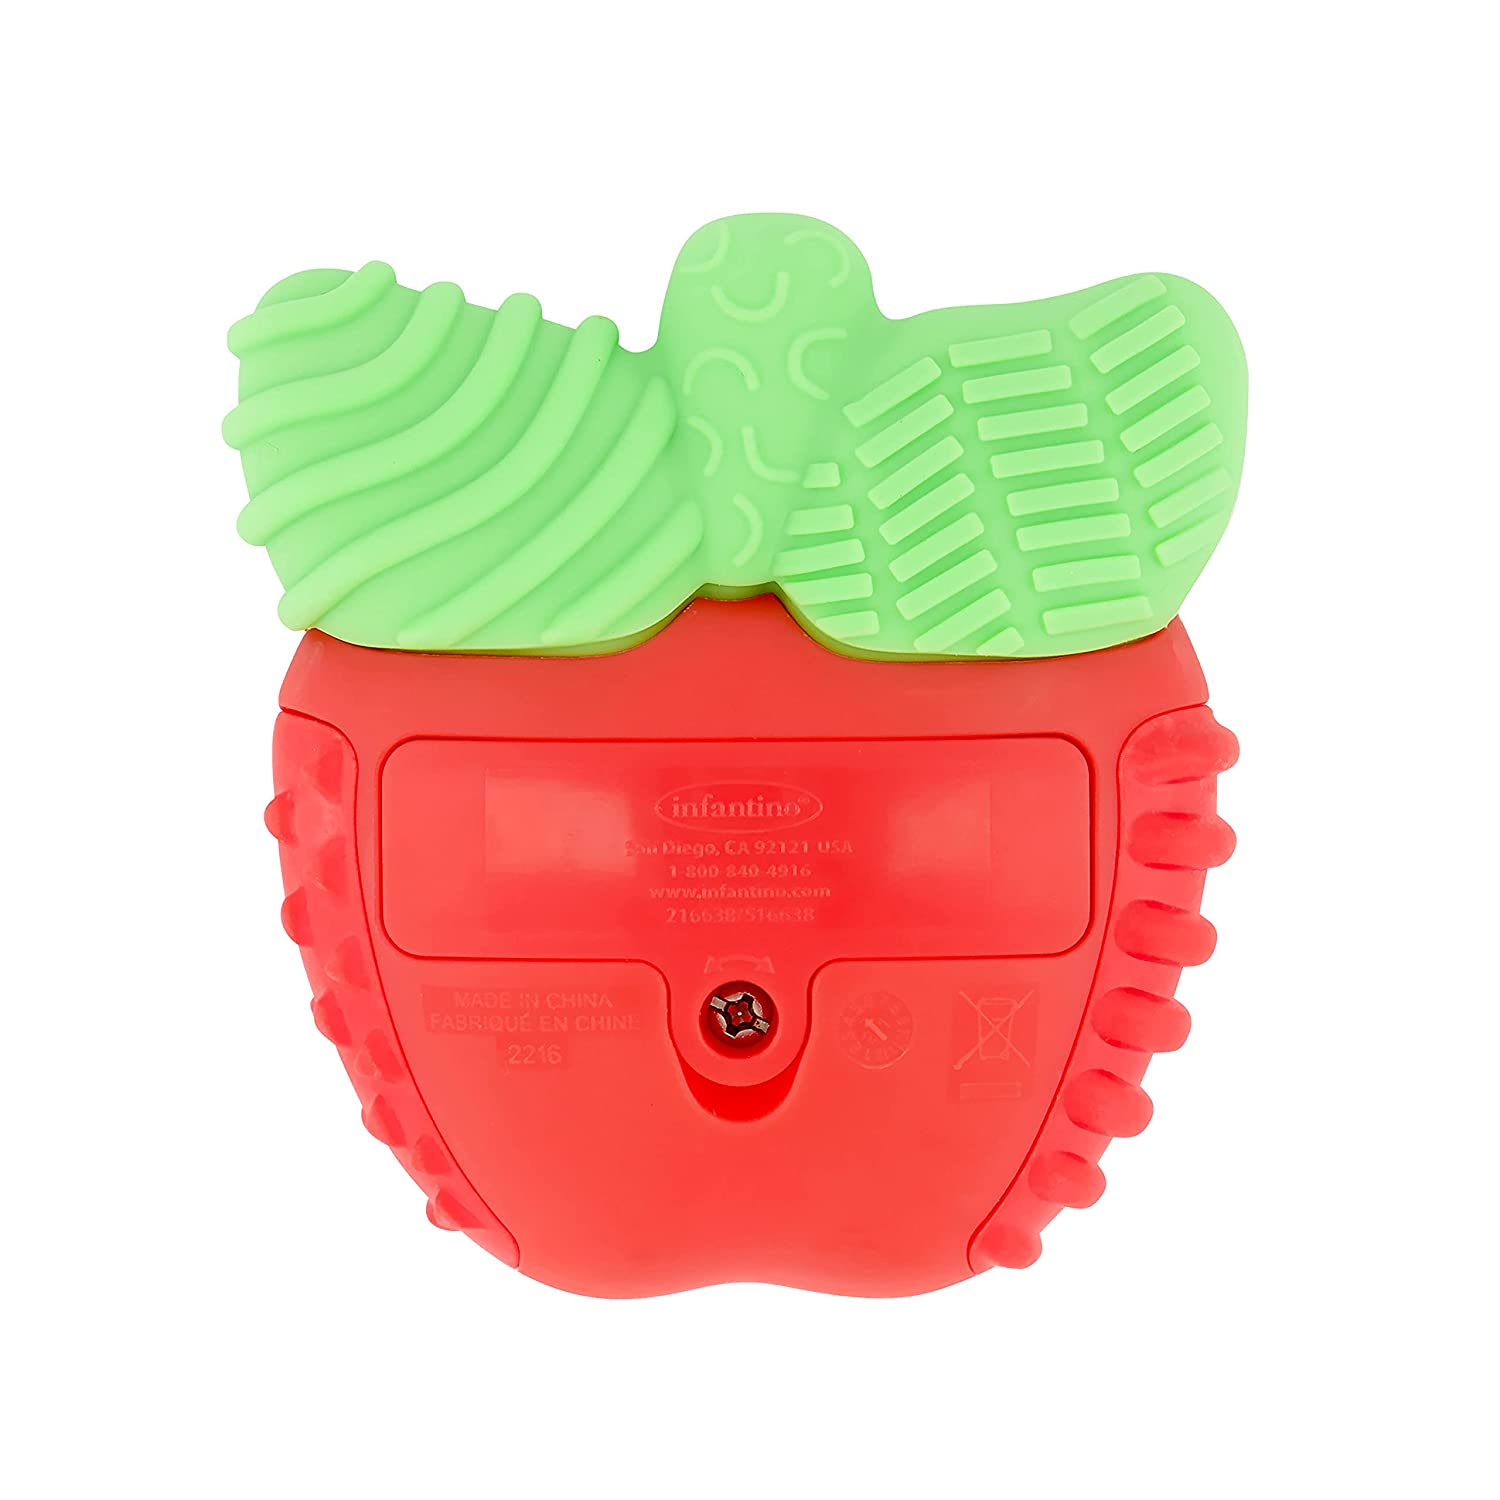 Infantino Lil' Nibblers Vibrating Apple Teether -Sensory Exploration and Teething Relief with Soothing Vibrations and Textures, Red Apple.